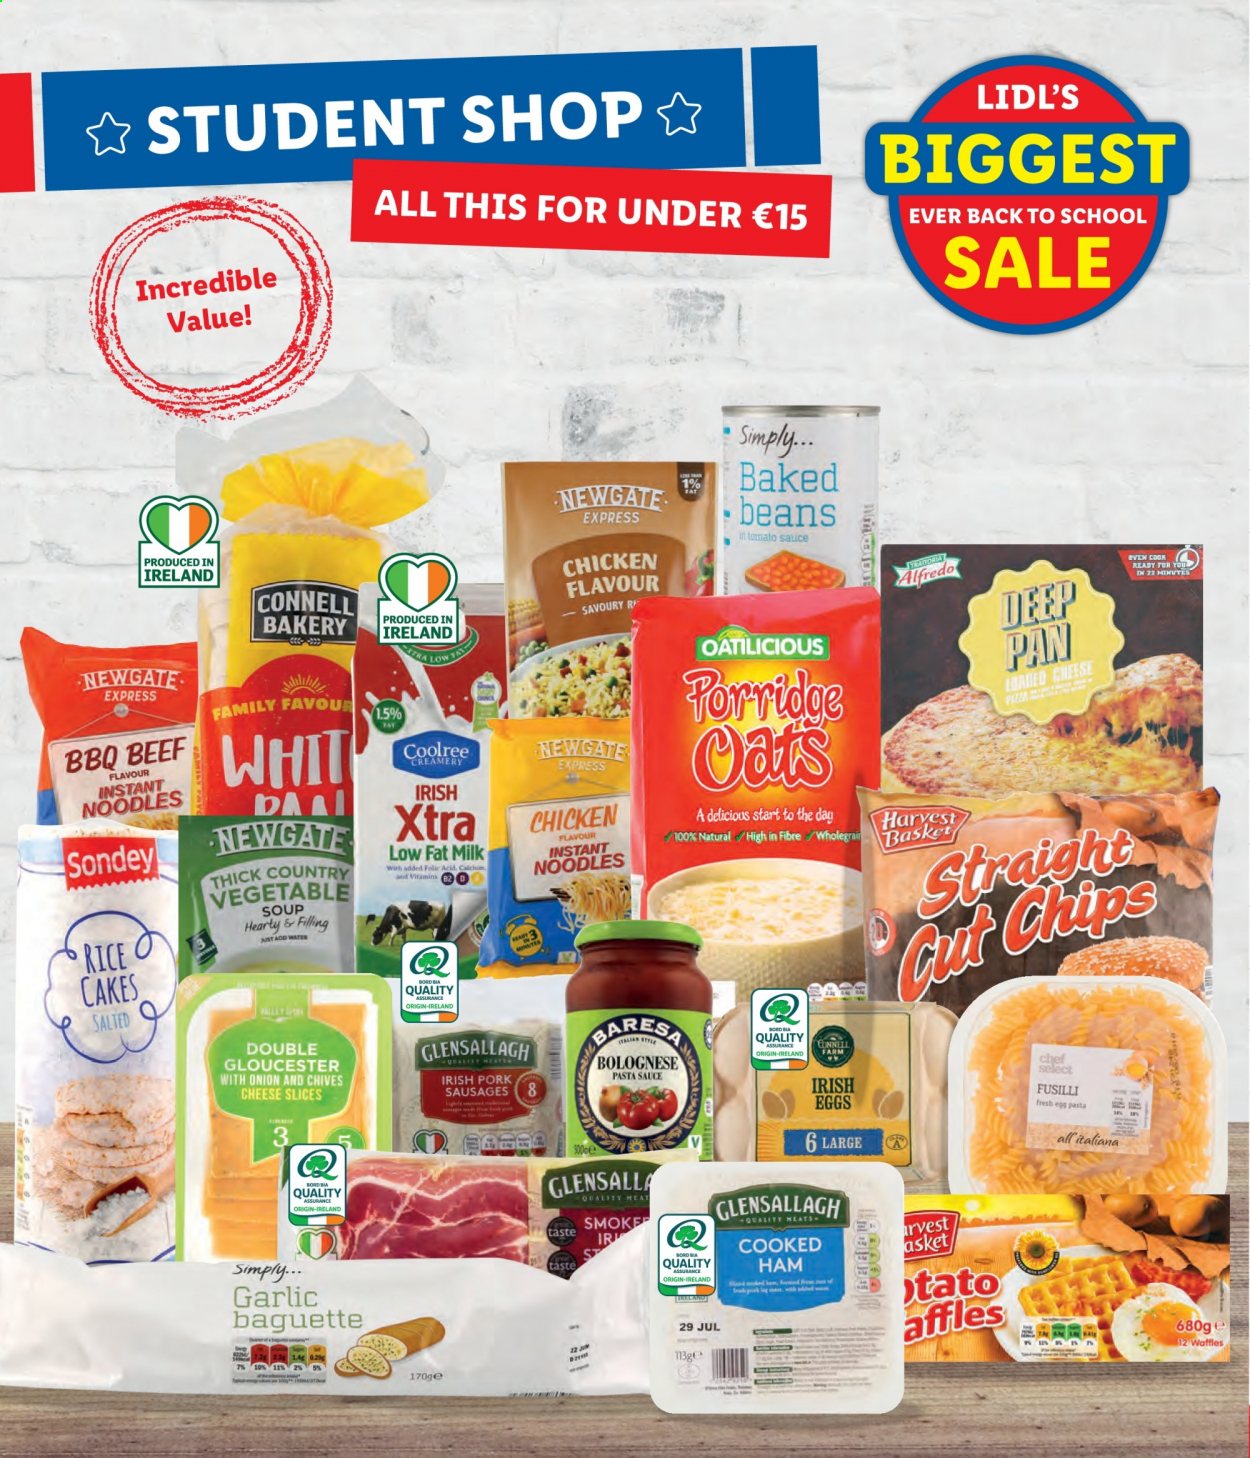 thumbnail - Lidl offer  - Sales products - baguette, cake, waffles, beans, garlic, chives, vegetable soup, pasta sauce, soup, instant noodles, sauce, noodles, sausage, sliced cheese, cheese, milk, chips, baked beans, XTRA, basket, pan. Page 24.